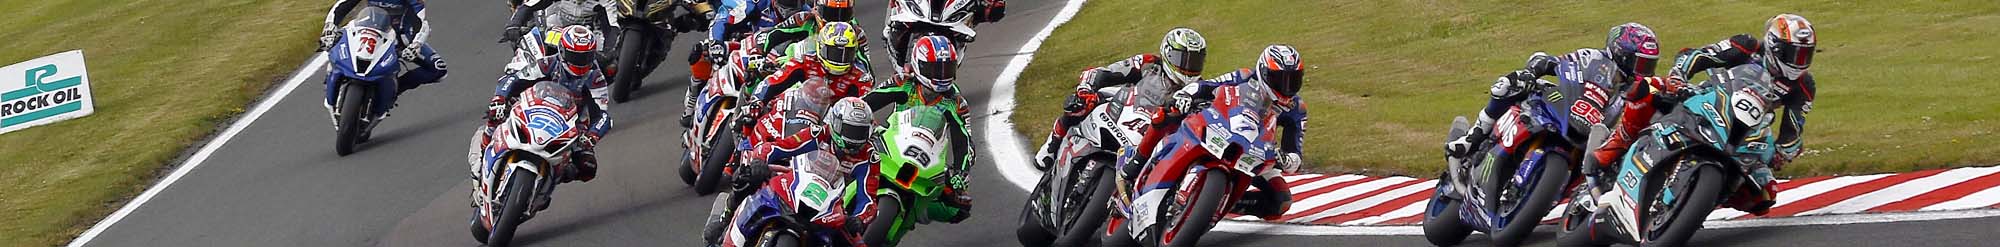 Championship leader Irwin ready to get amongst it at Oulton Park 